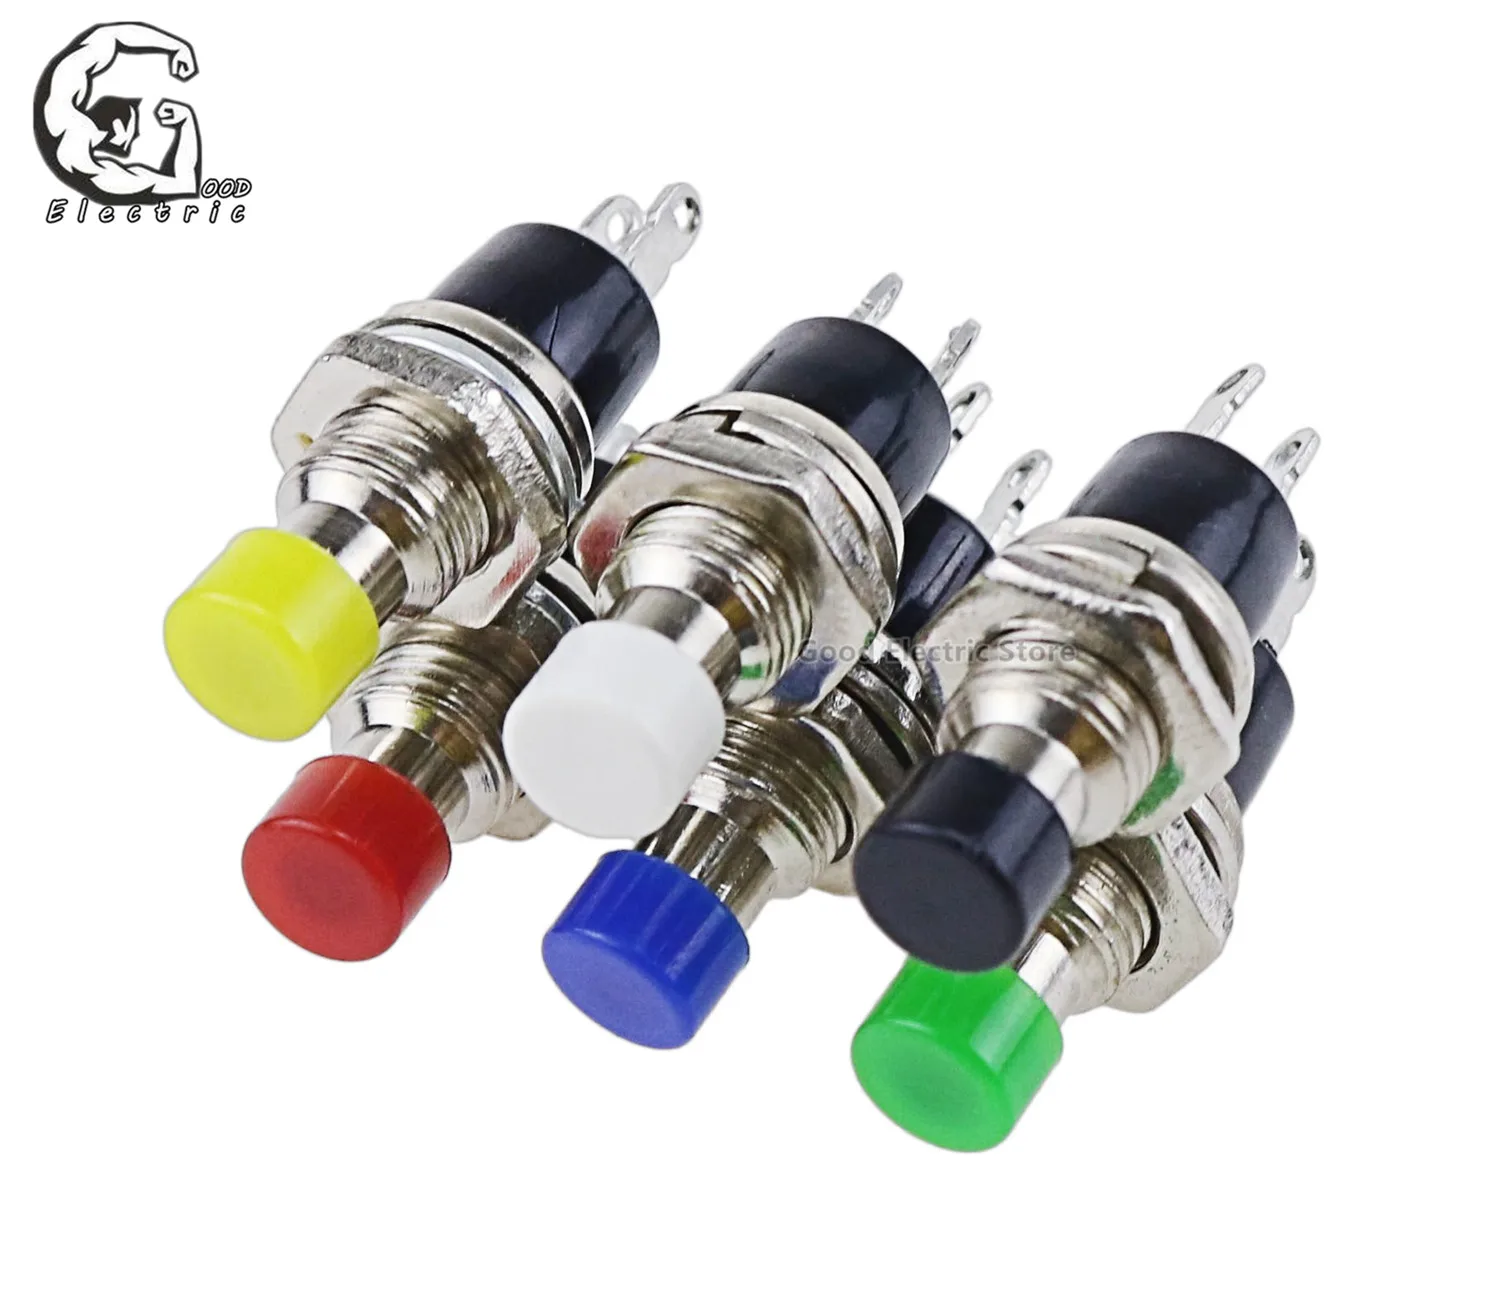 7mm Round Metal Push Button Momentary Switch Black White Red Green Blue Yellow 